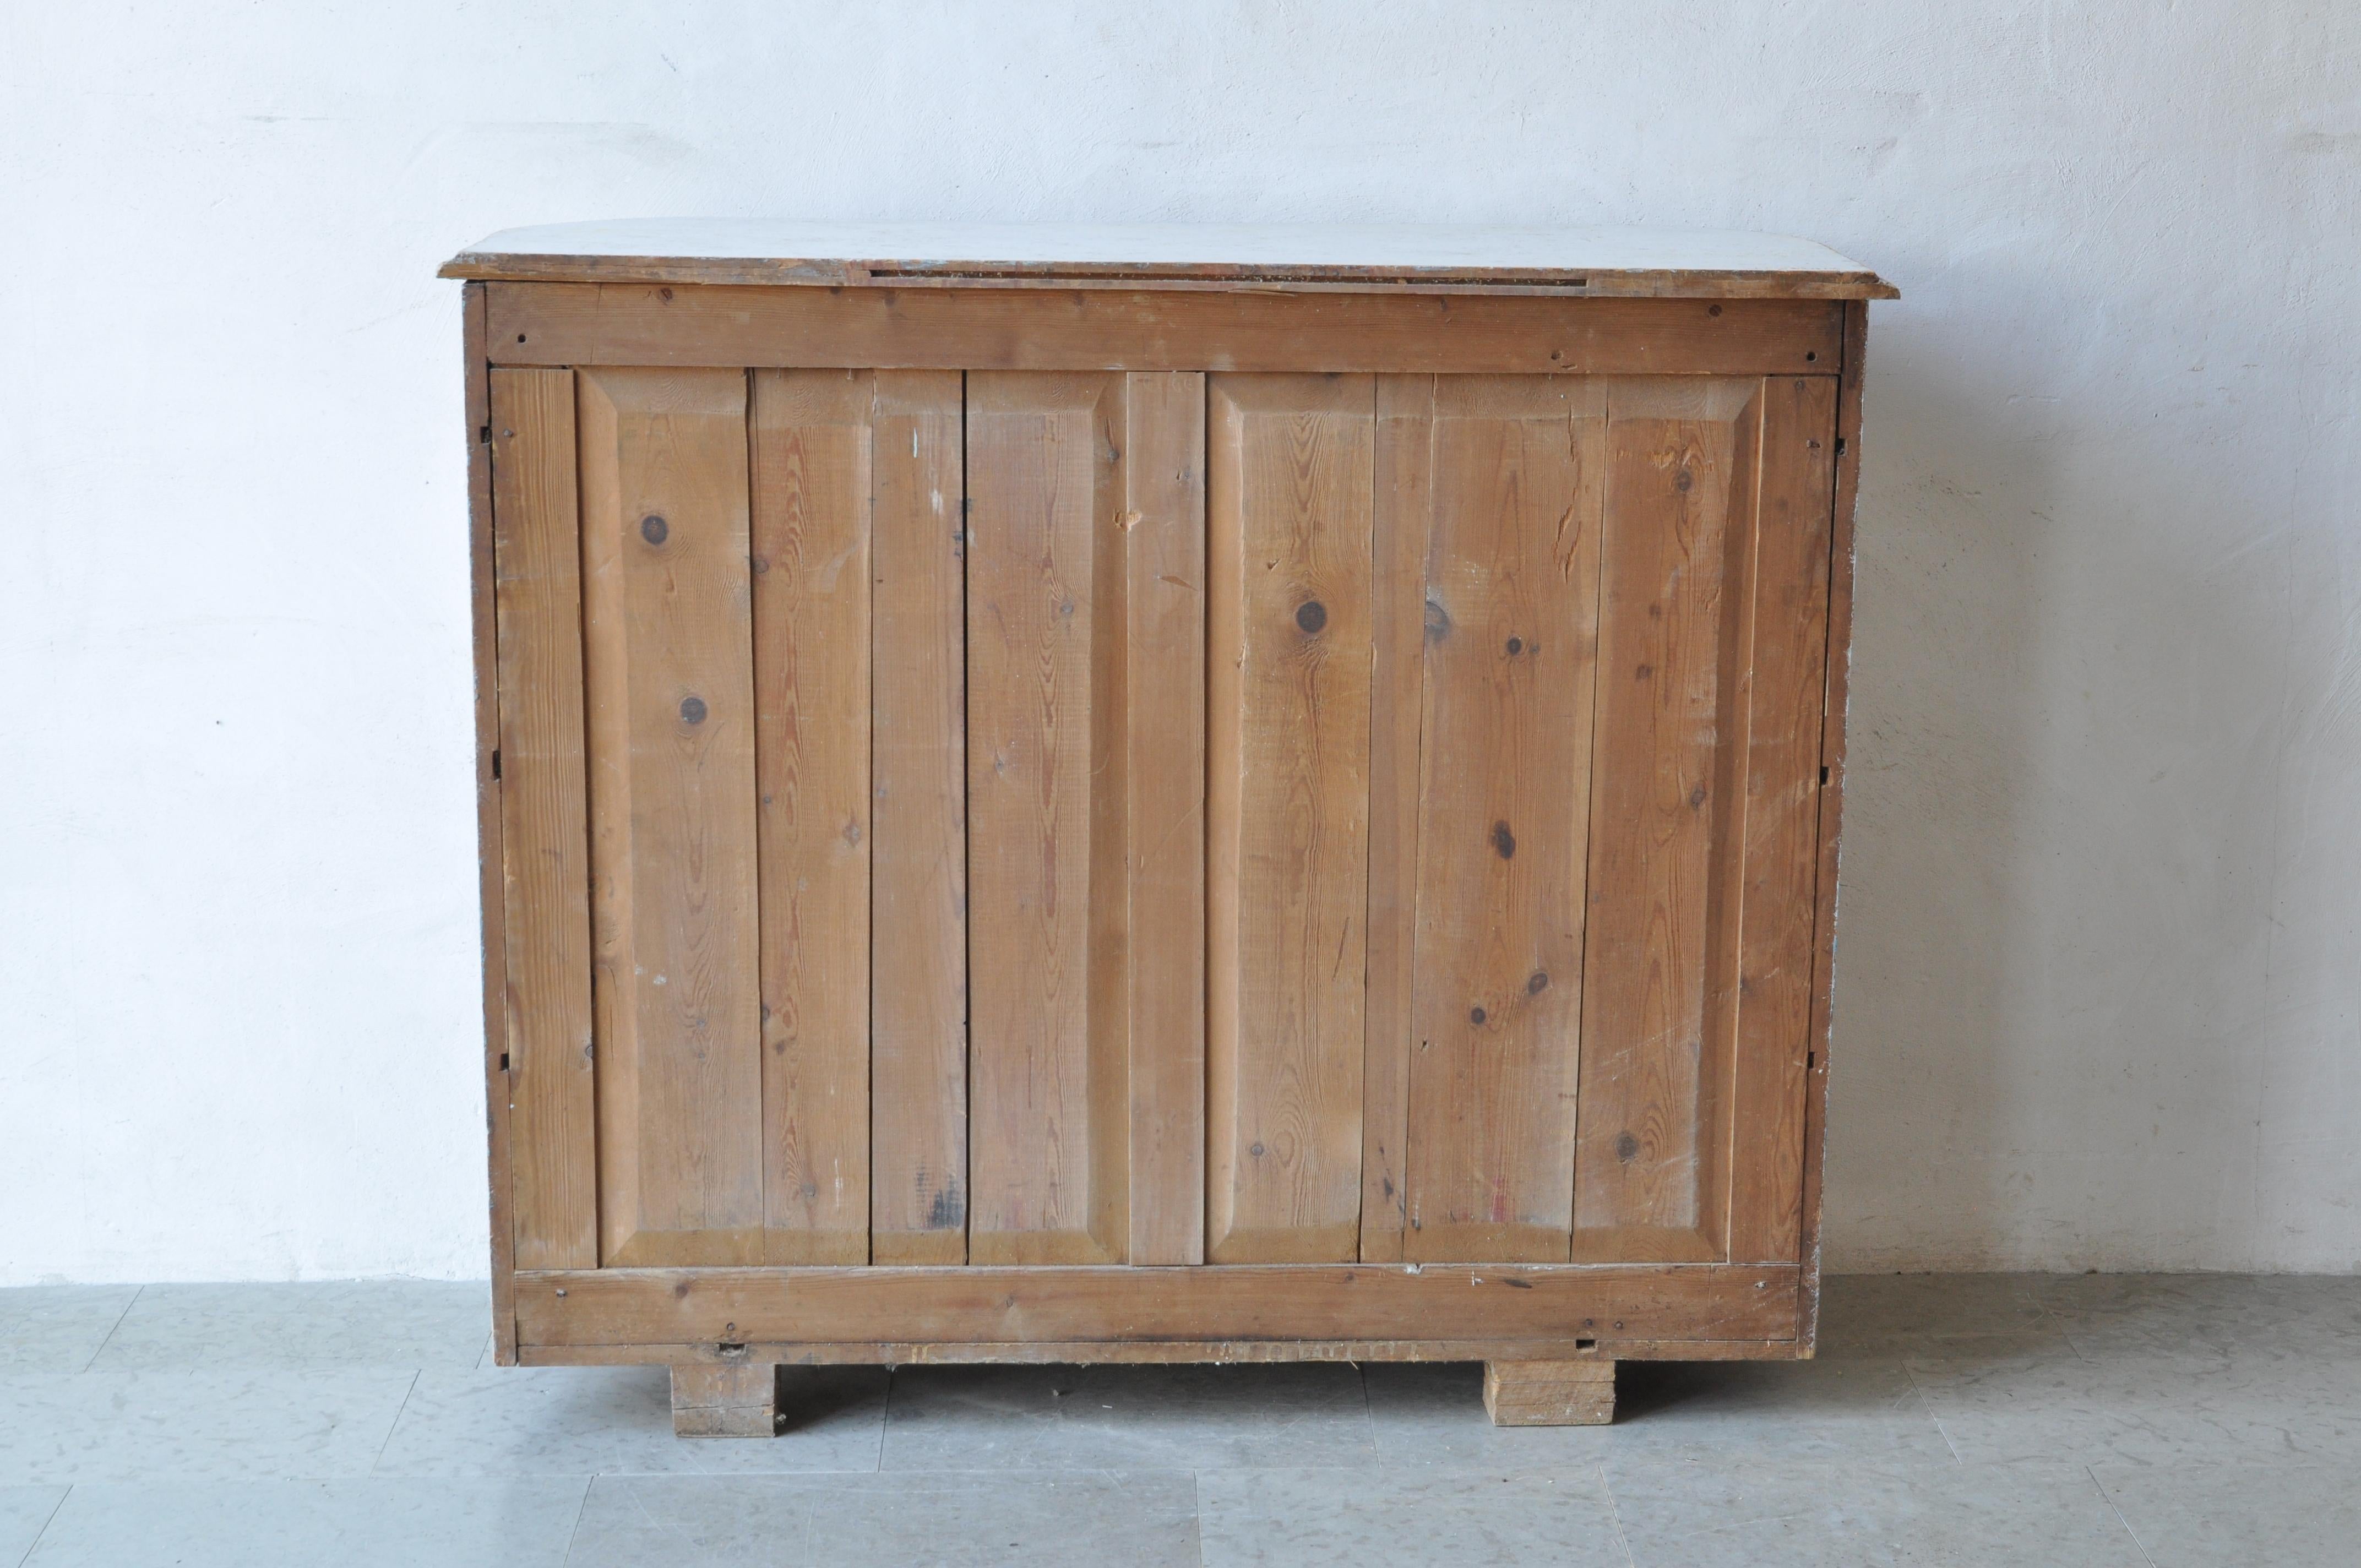 Wood Swedish 1850s Distressed Light Gray Painted Sideboard with Rounded Corners